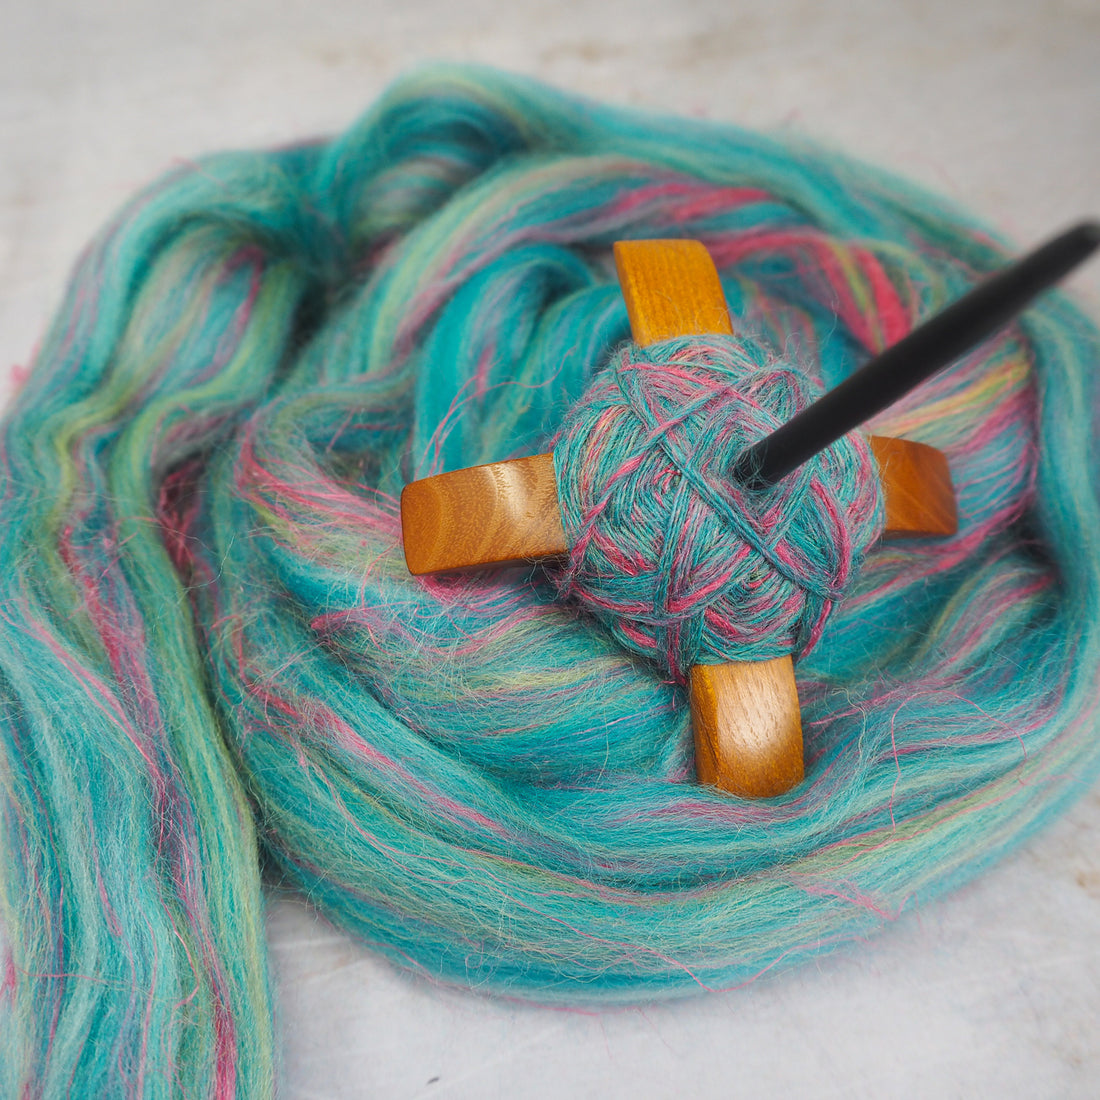 A turkish spindle wrapped with hand-spun yarn, lying on a bed of turquoise fibre. 